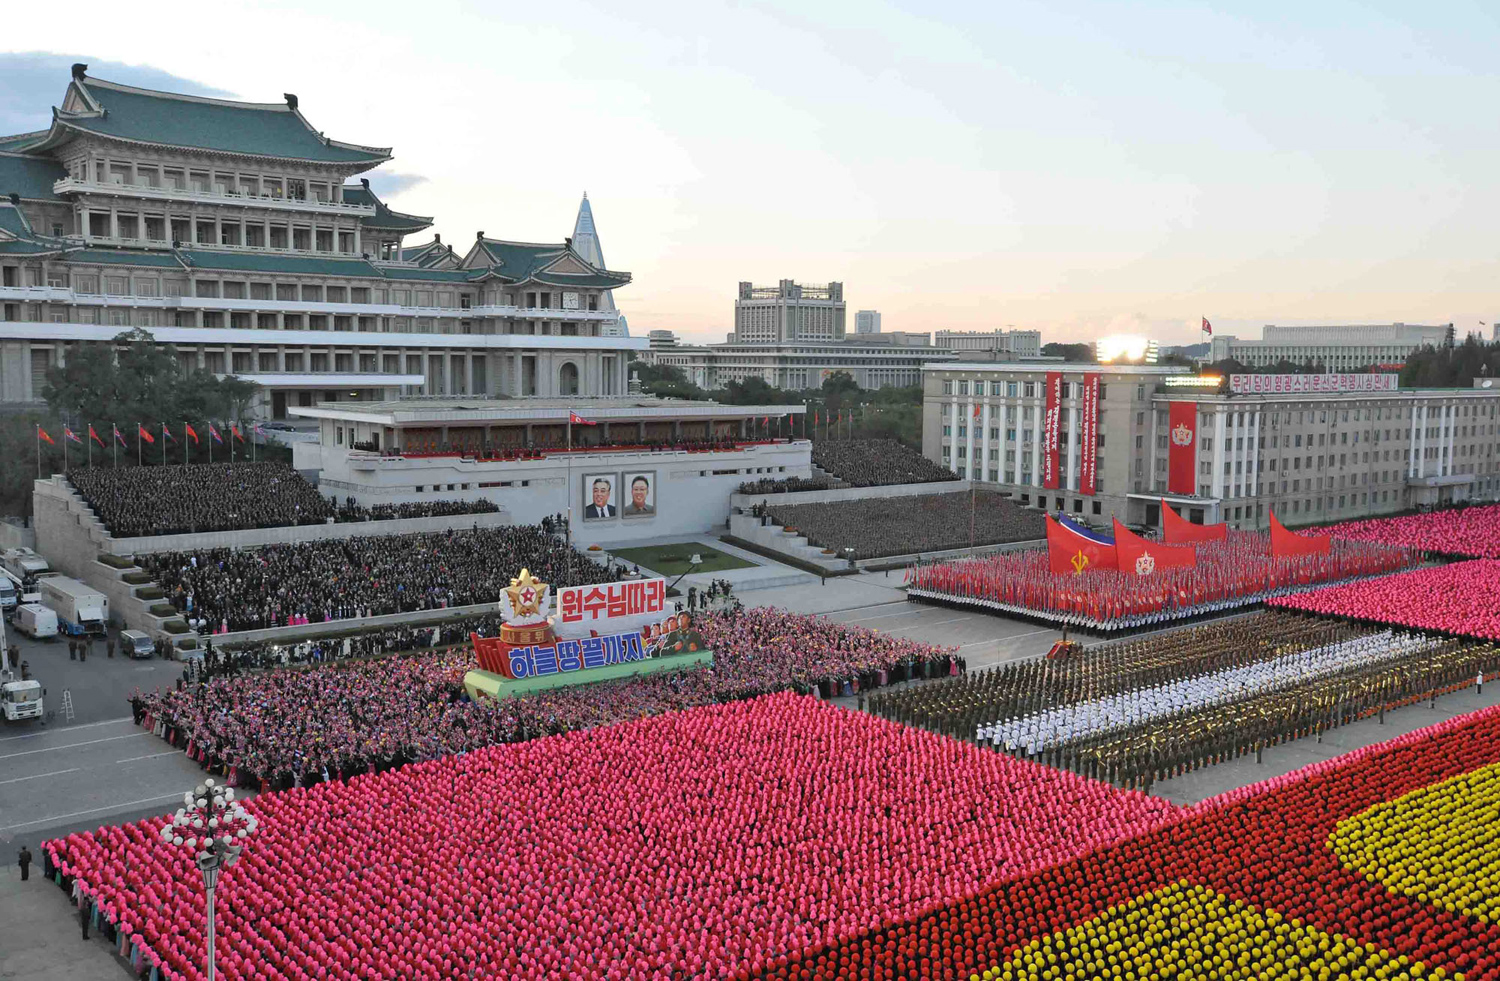 North Korea Marks 70 Years of Workers’ Party Rule 06